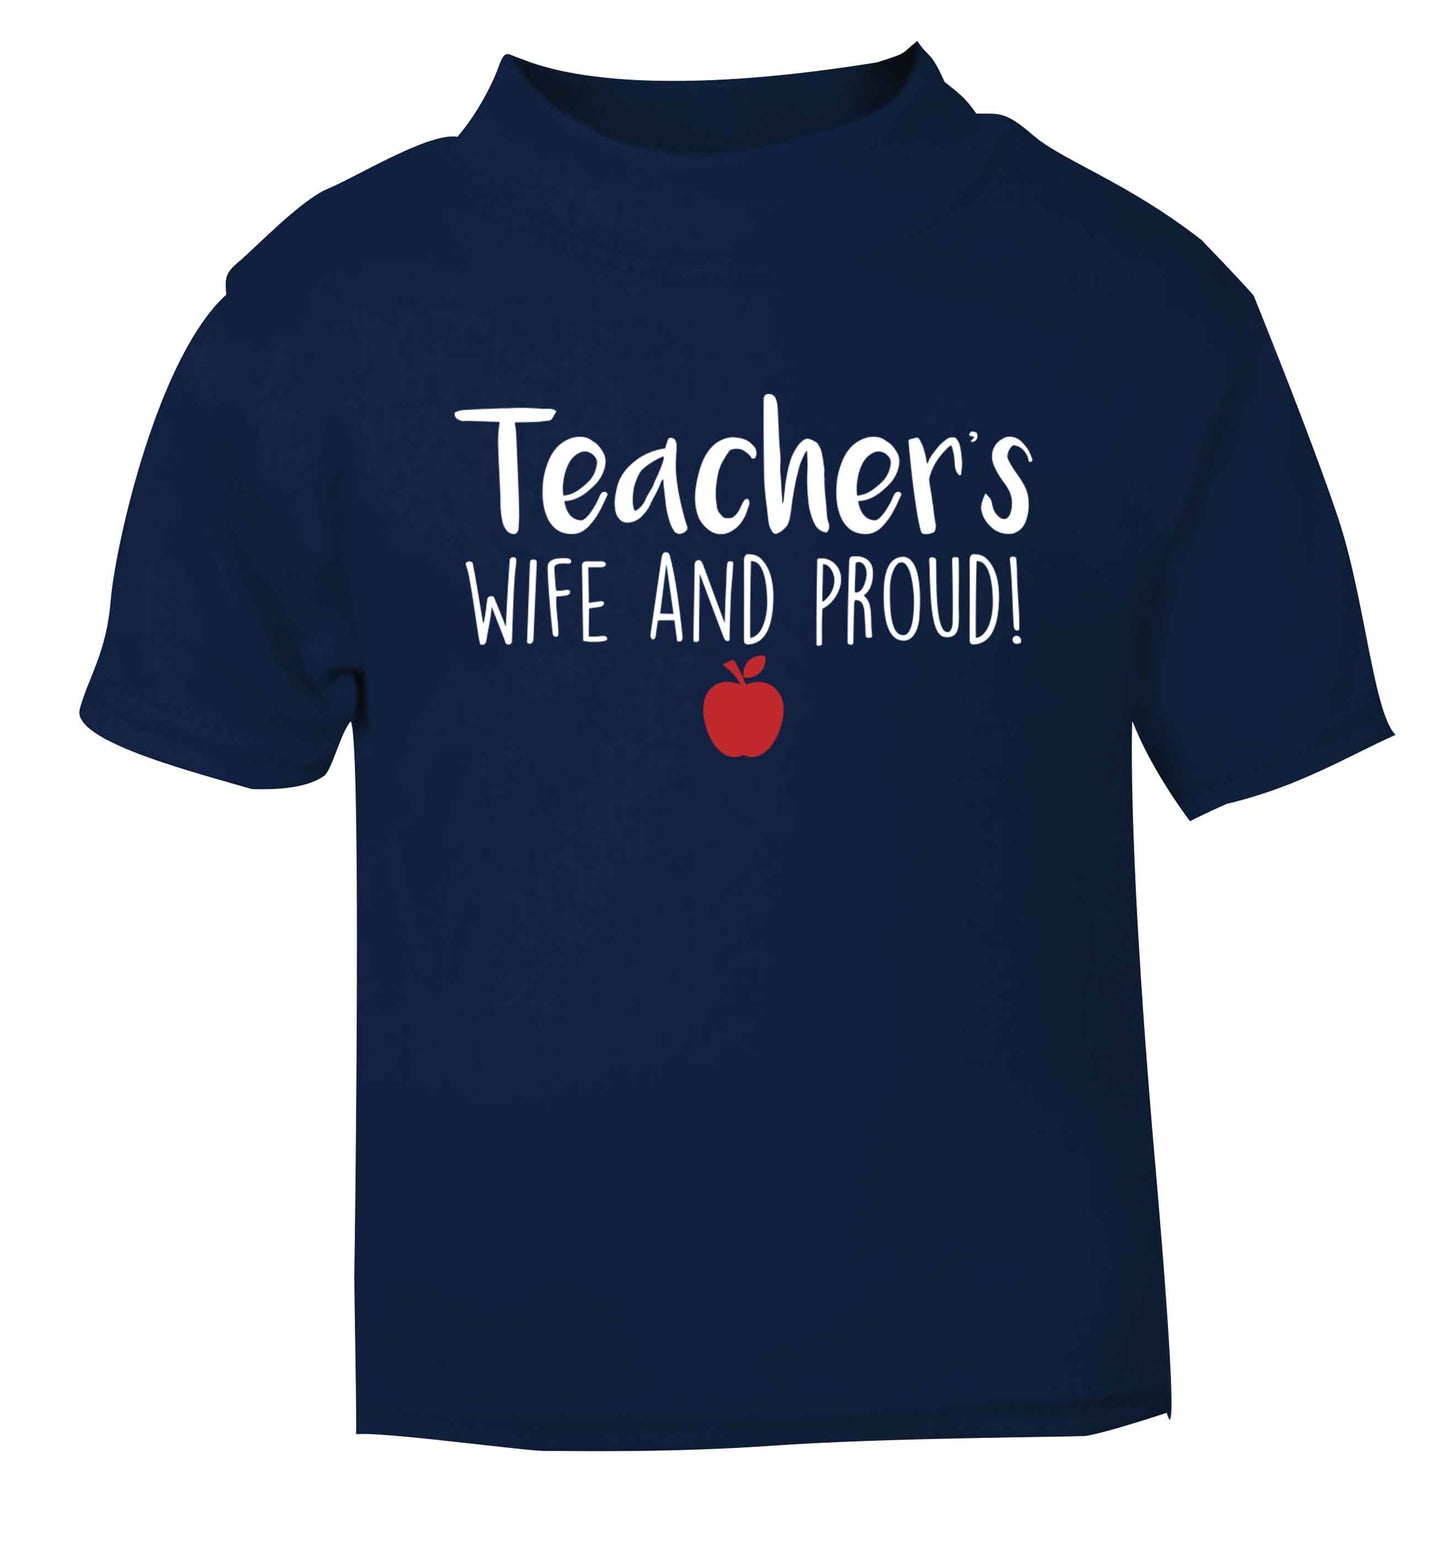 Teachers wife and proud navy baby toddler Tshirt 2 Years